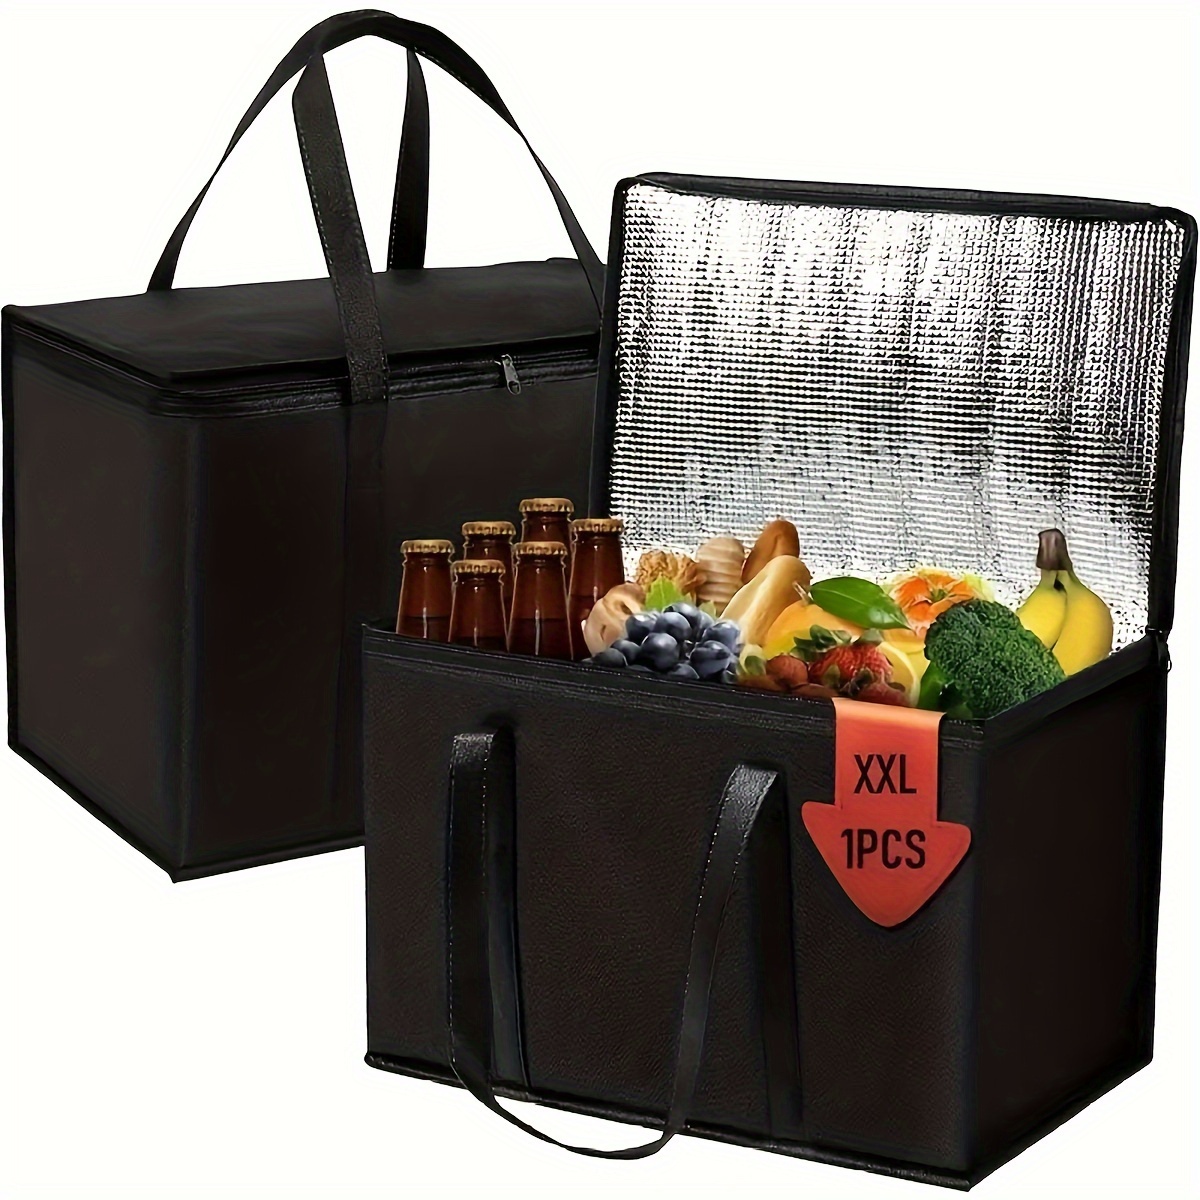 

1pc Insulated Food Delivery Bag - Reusable, Lightweight & Durable With Sturdy Zipper, Foldable For Easy Storage